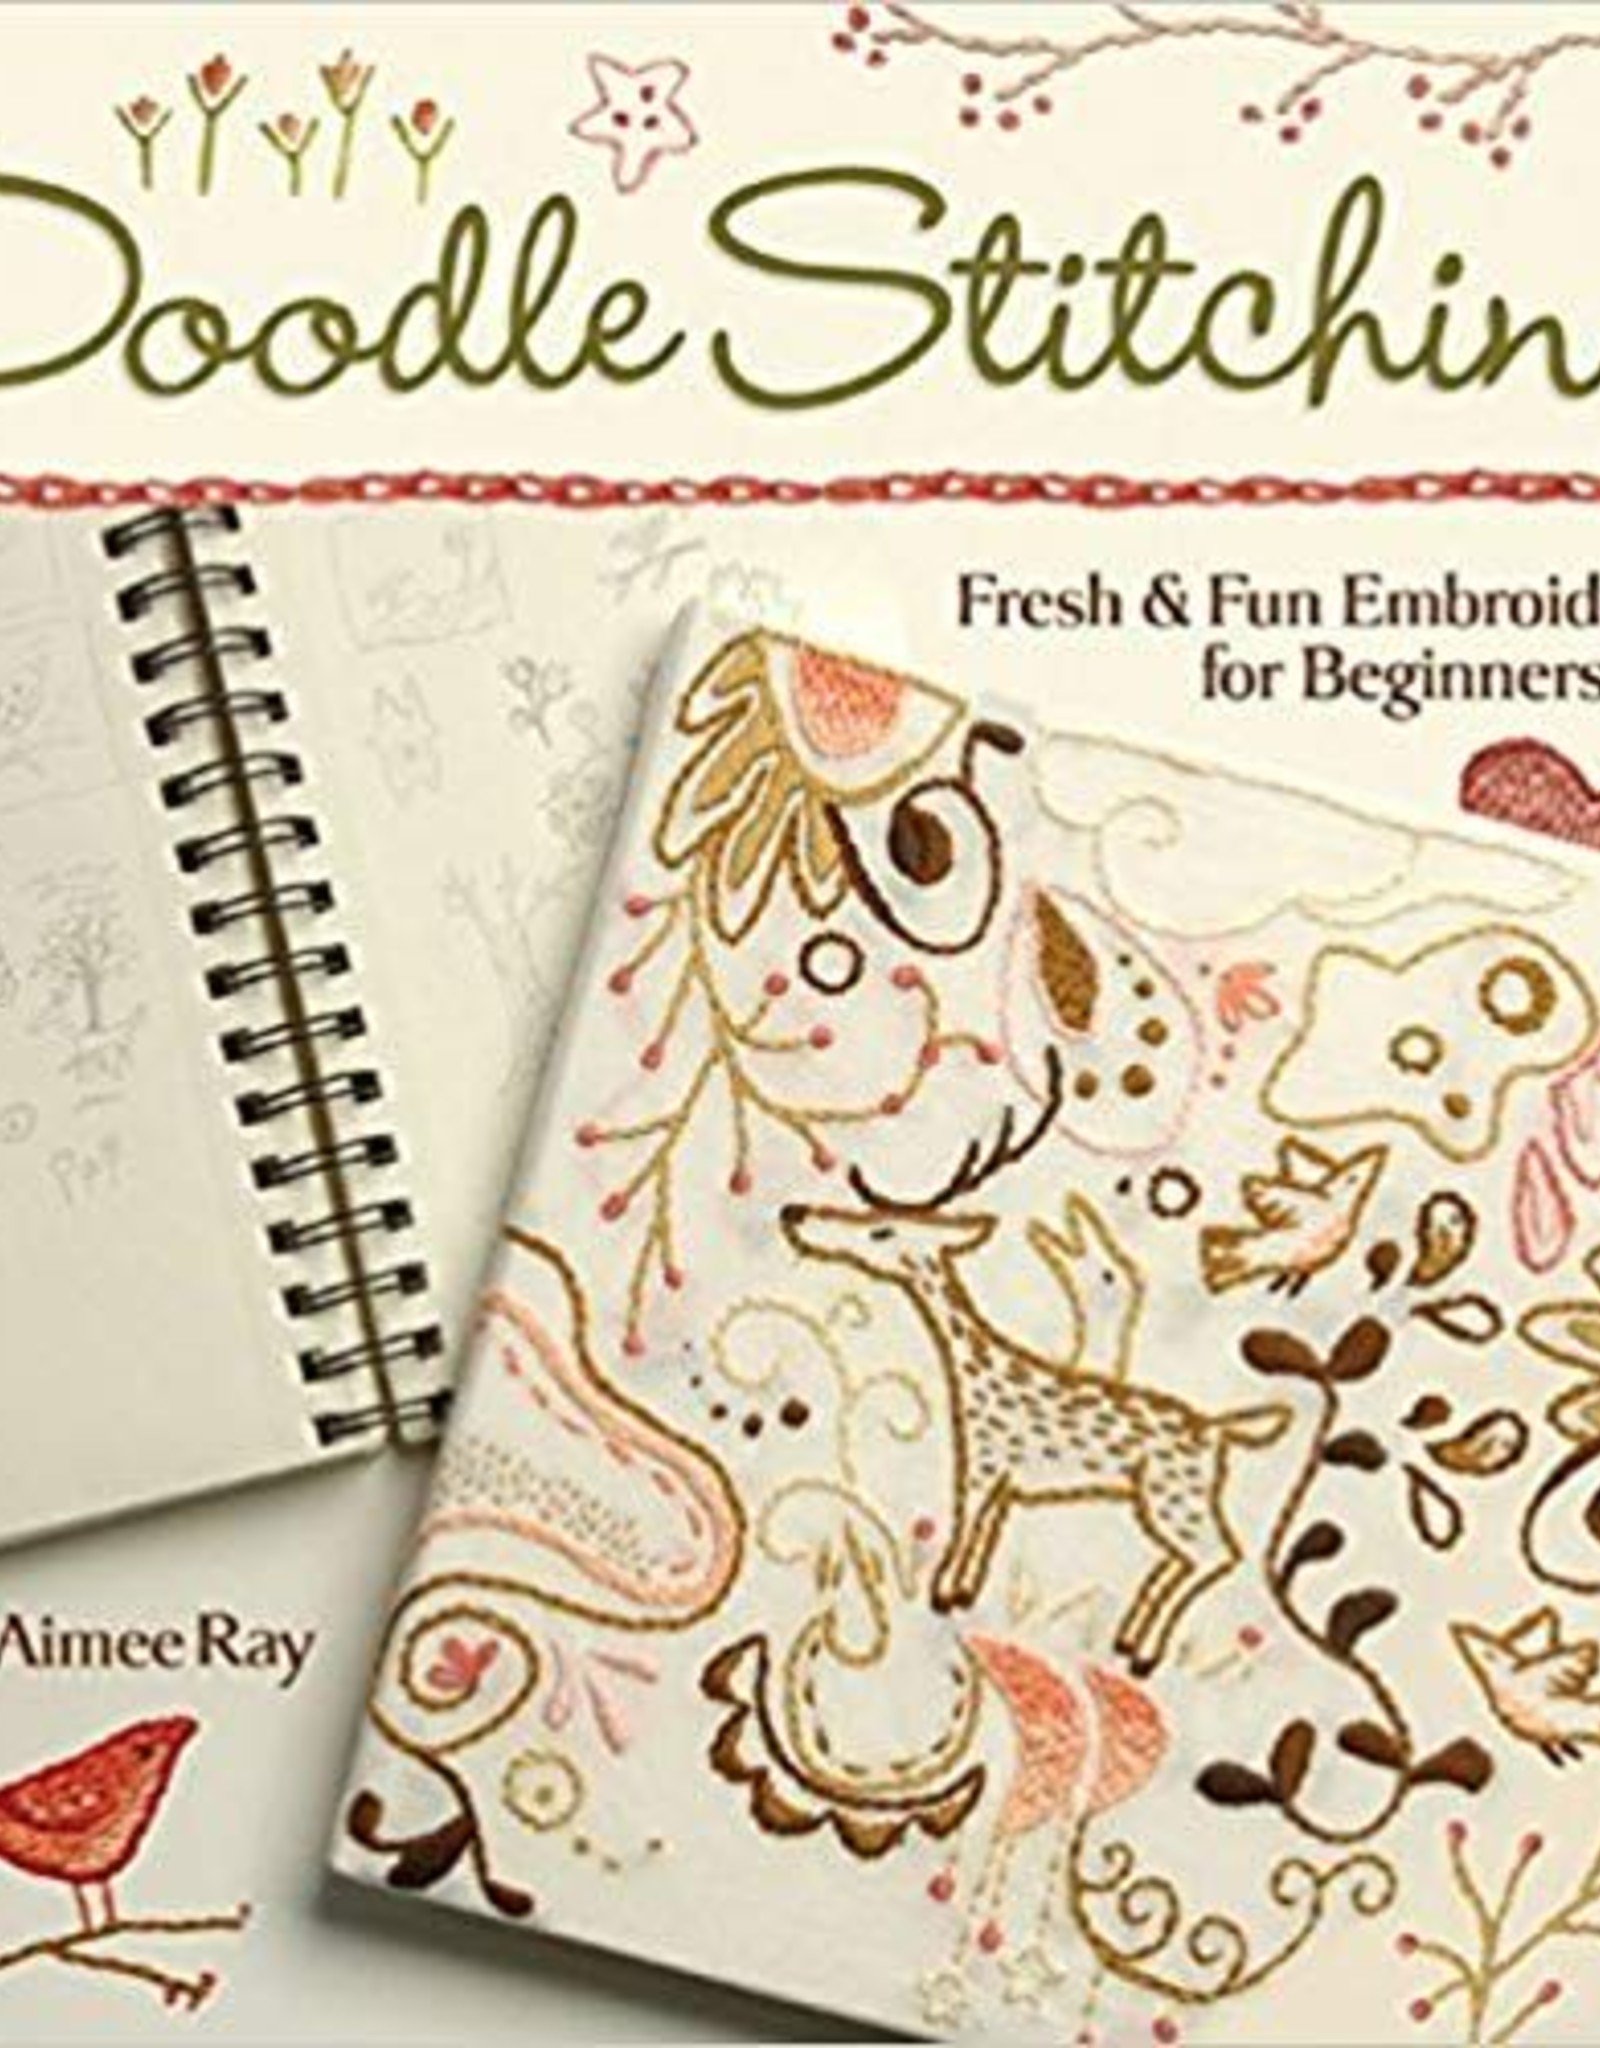 Doodle Stitching: Fresh & Fun Embroidery for Beginners  by Aimee Ray